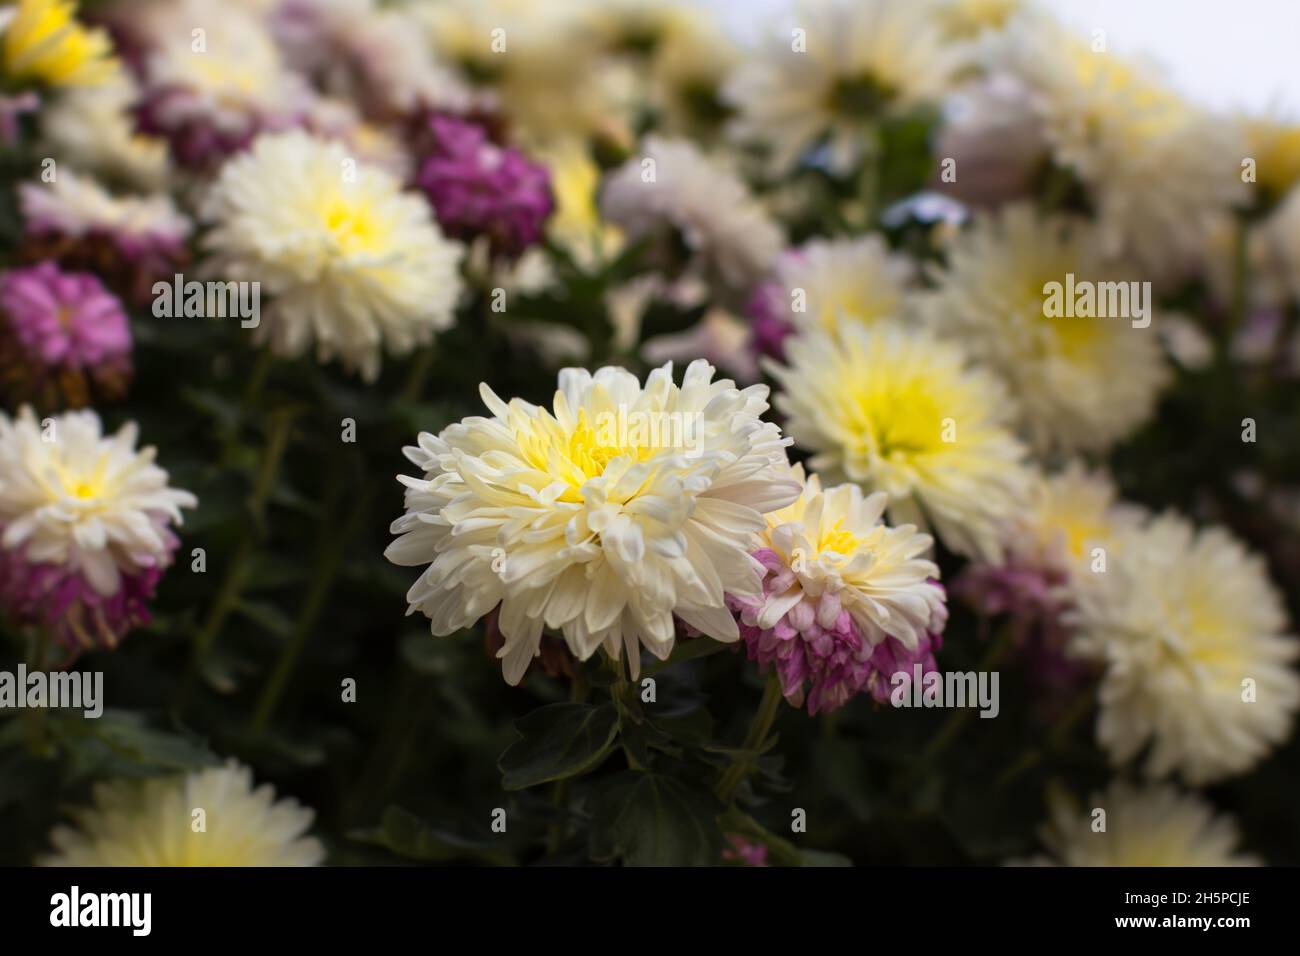 Chrysanthemum garden. White autumn flowers among orange ones in a flower bed. Beautiful delicate chrysanthemums bloomed in the park. Soft focus Stock Photo